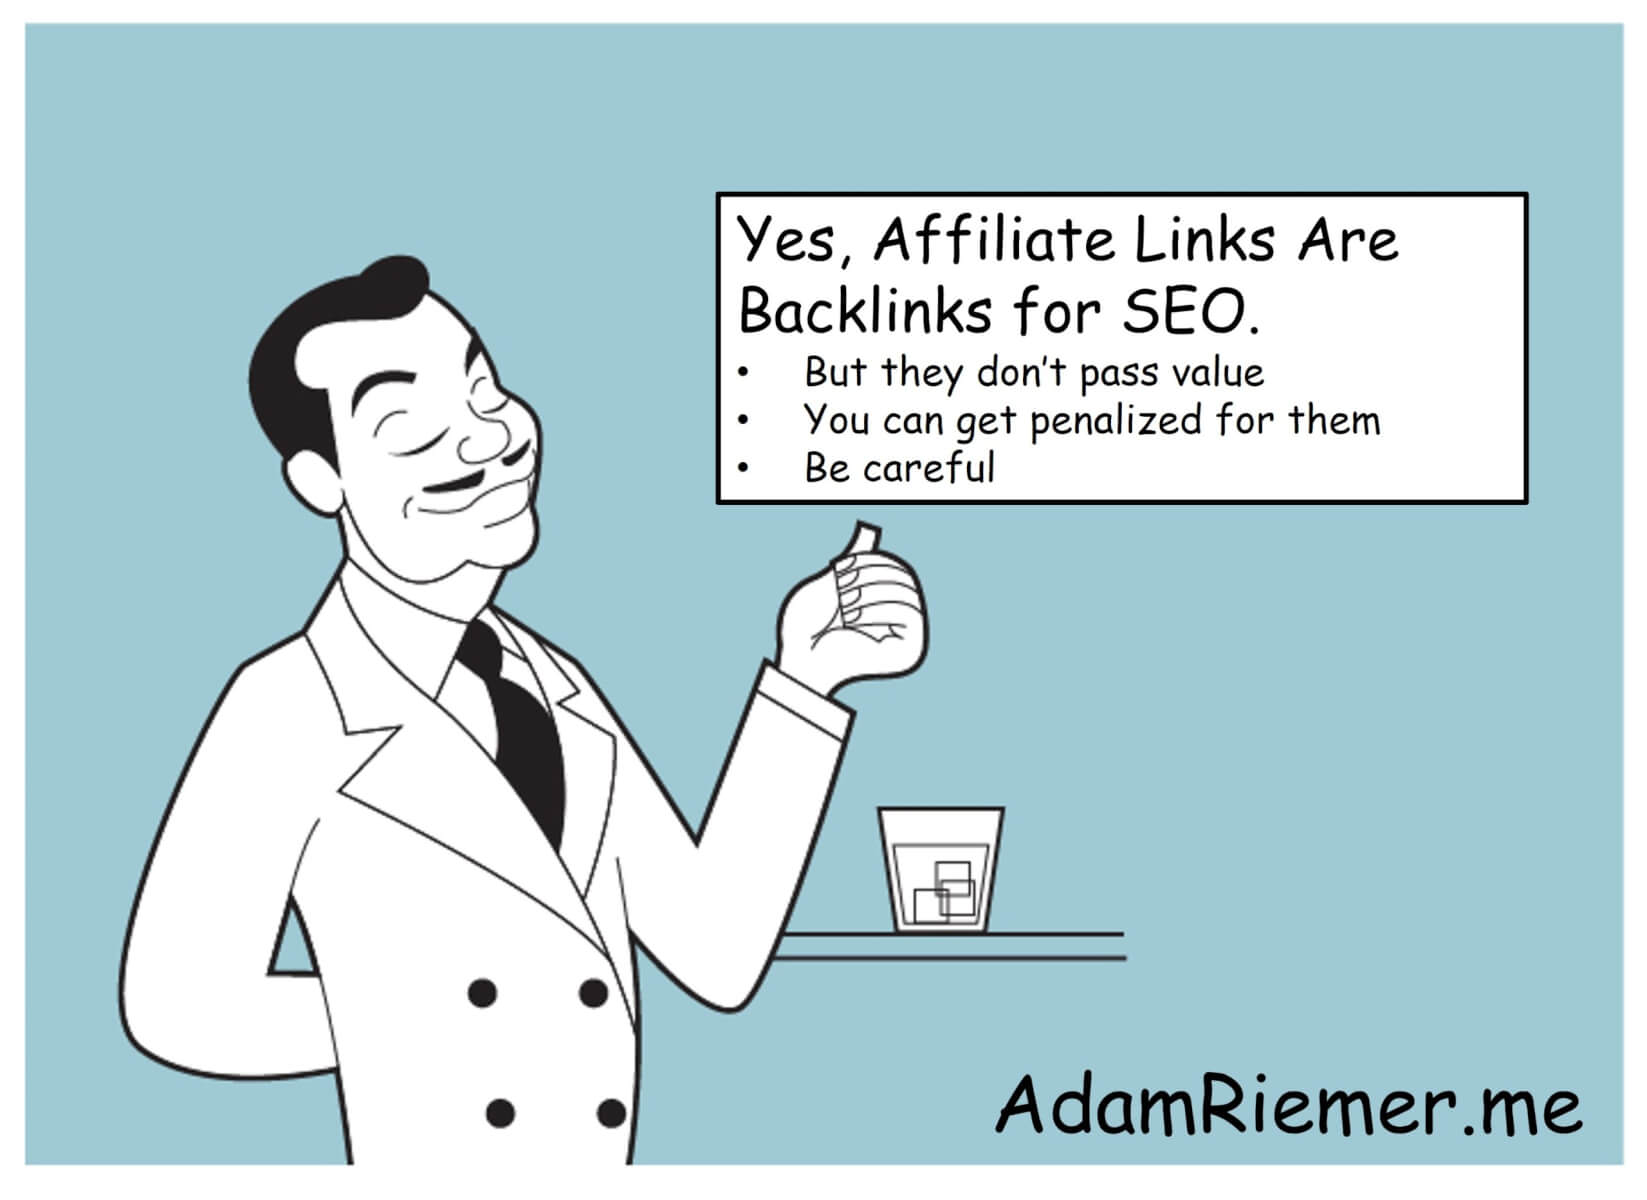 Affiliate Links are Backlinks for SEO, But Bad Ones.